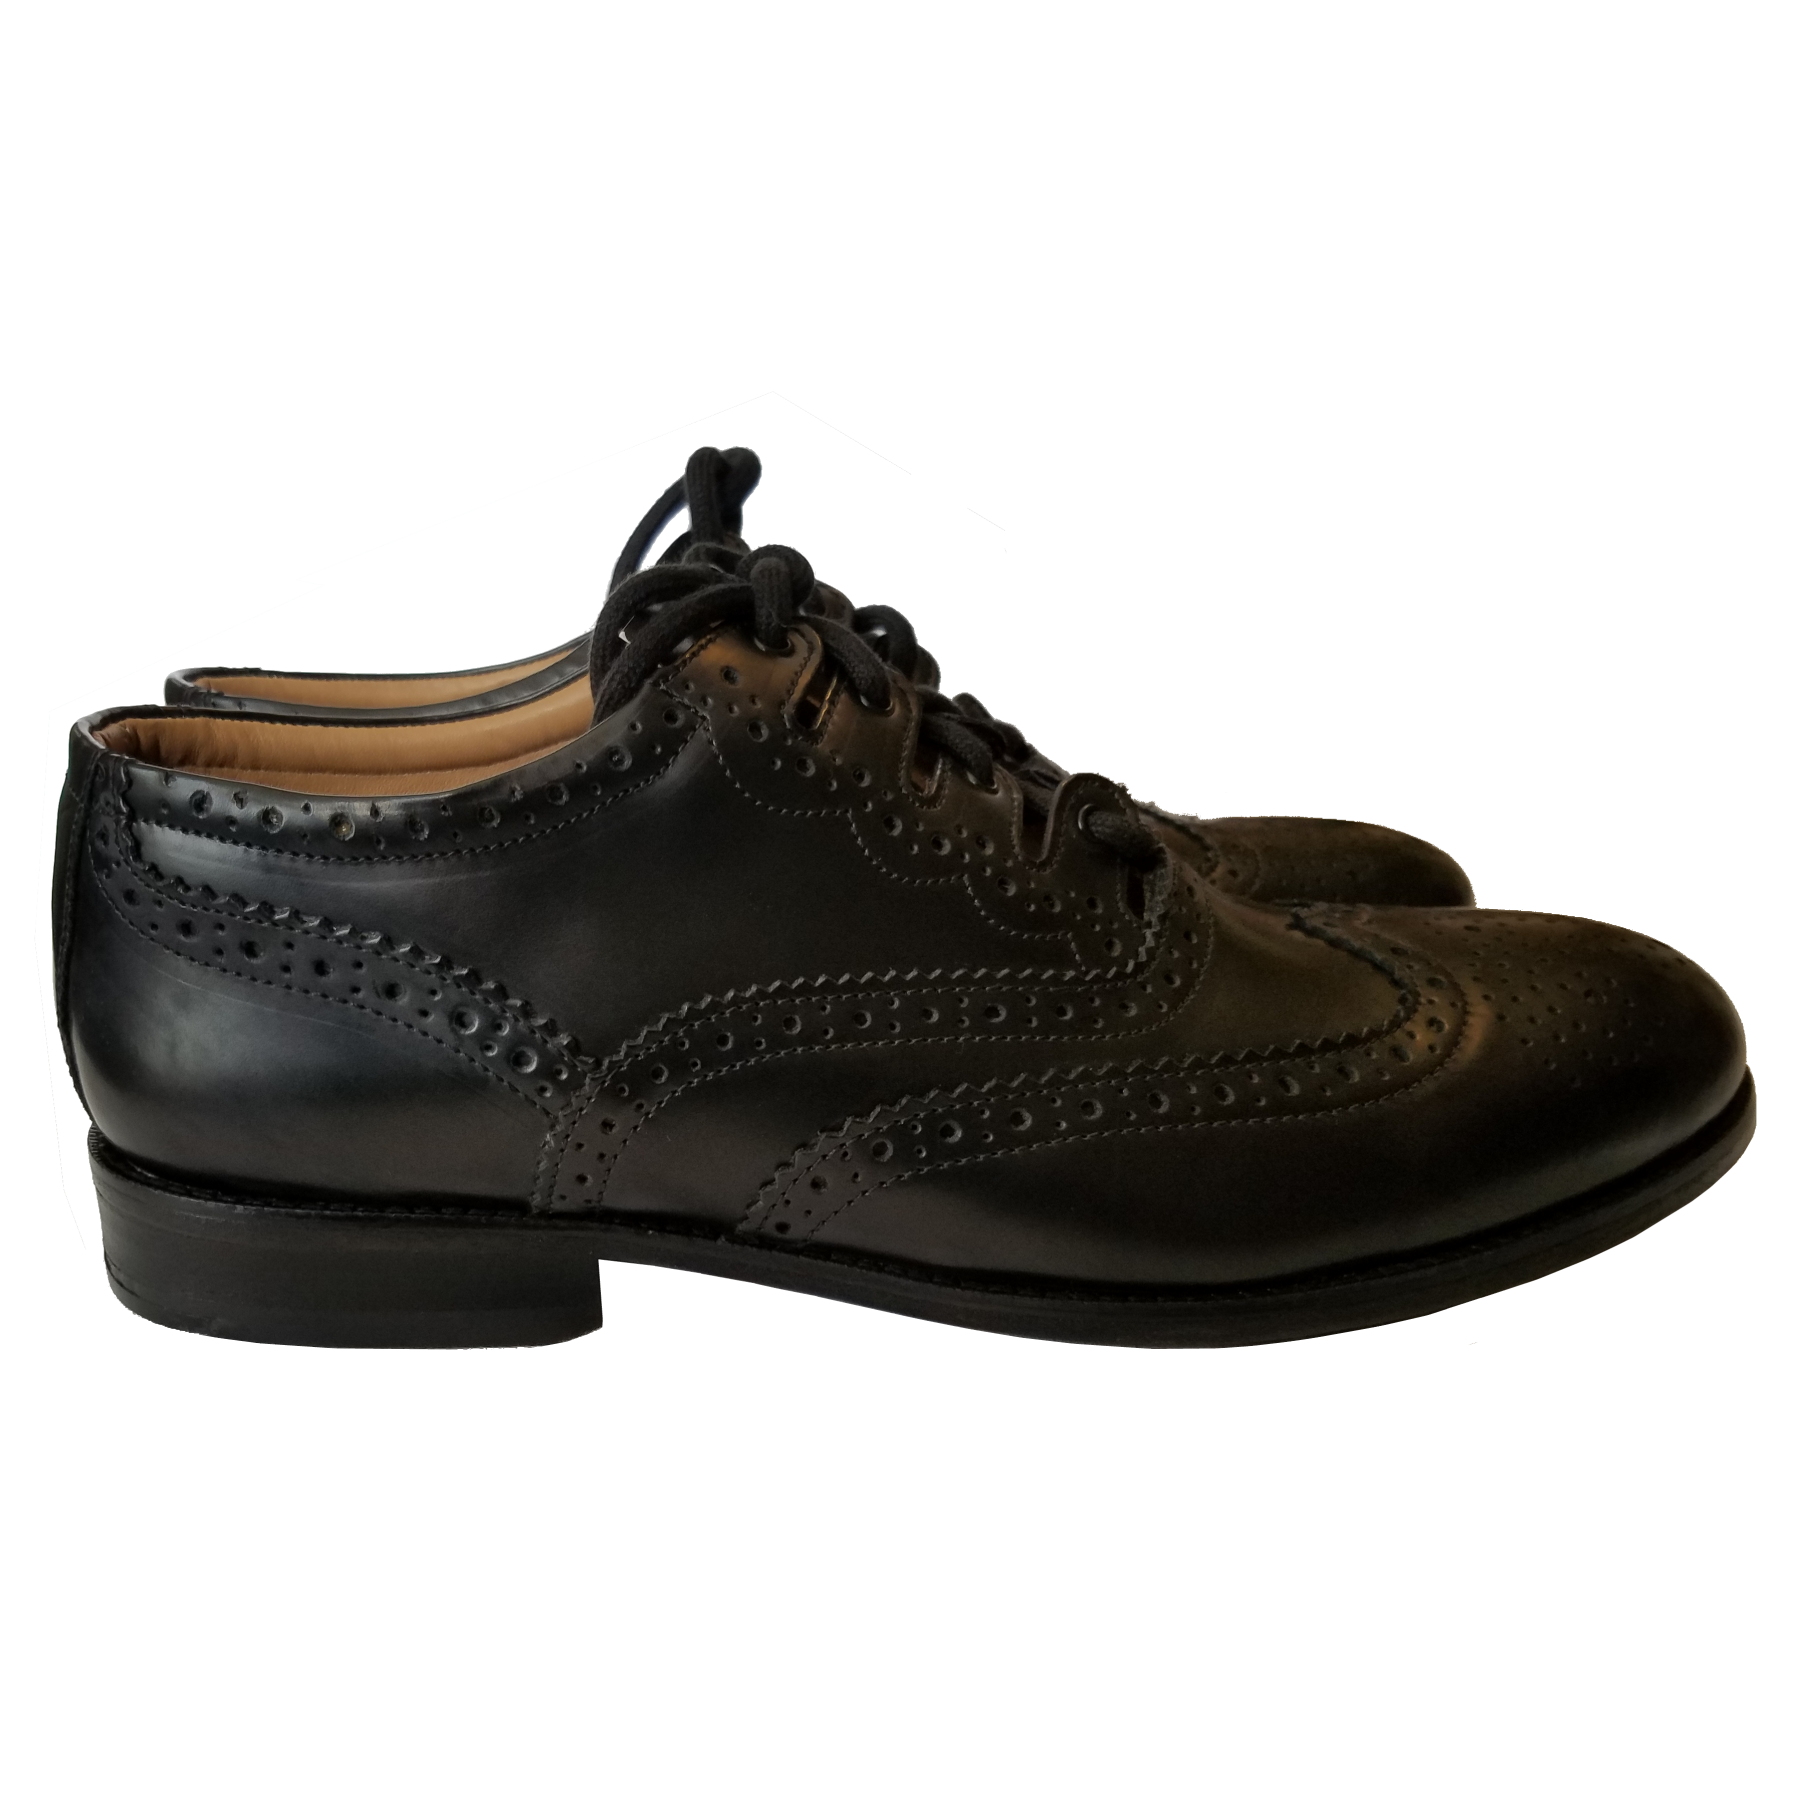 Thistle 7051 Brogues